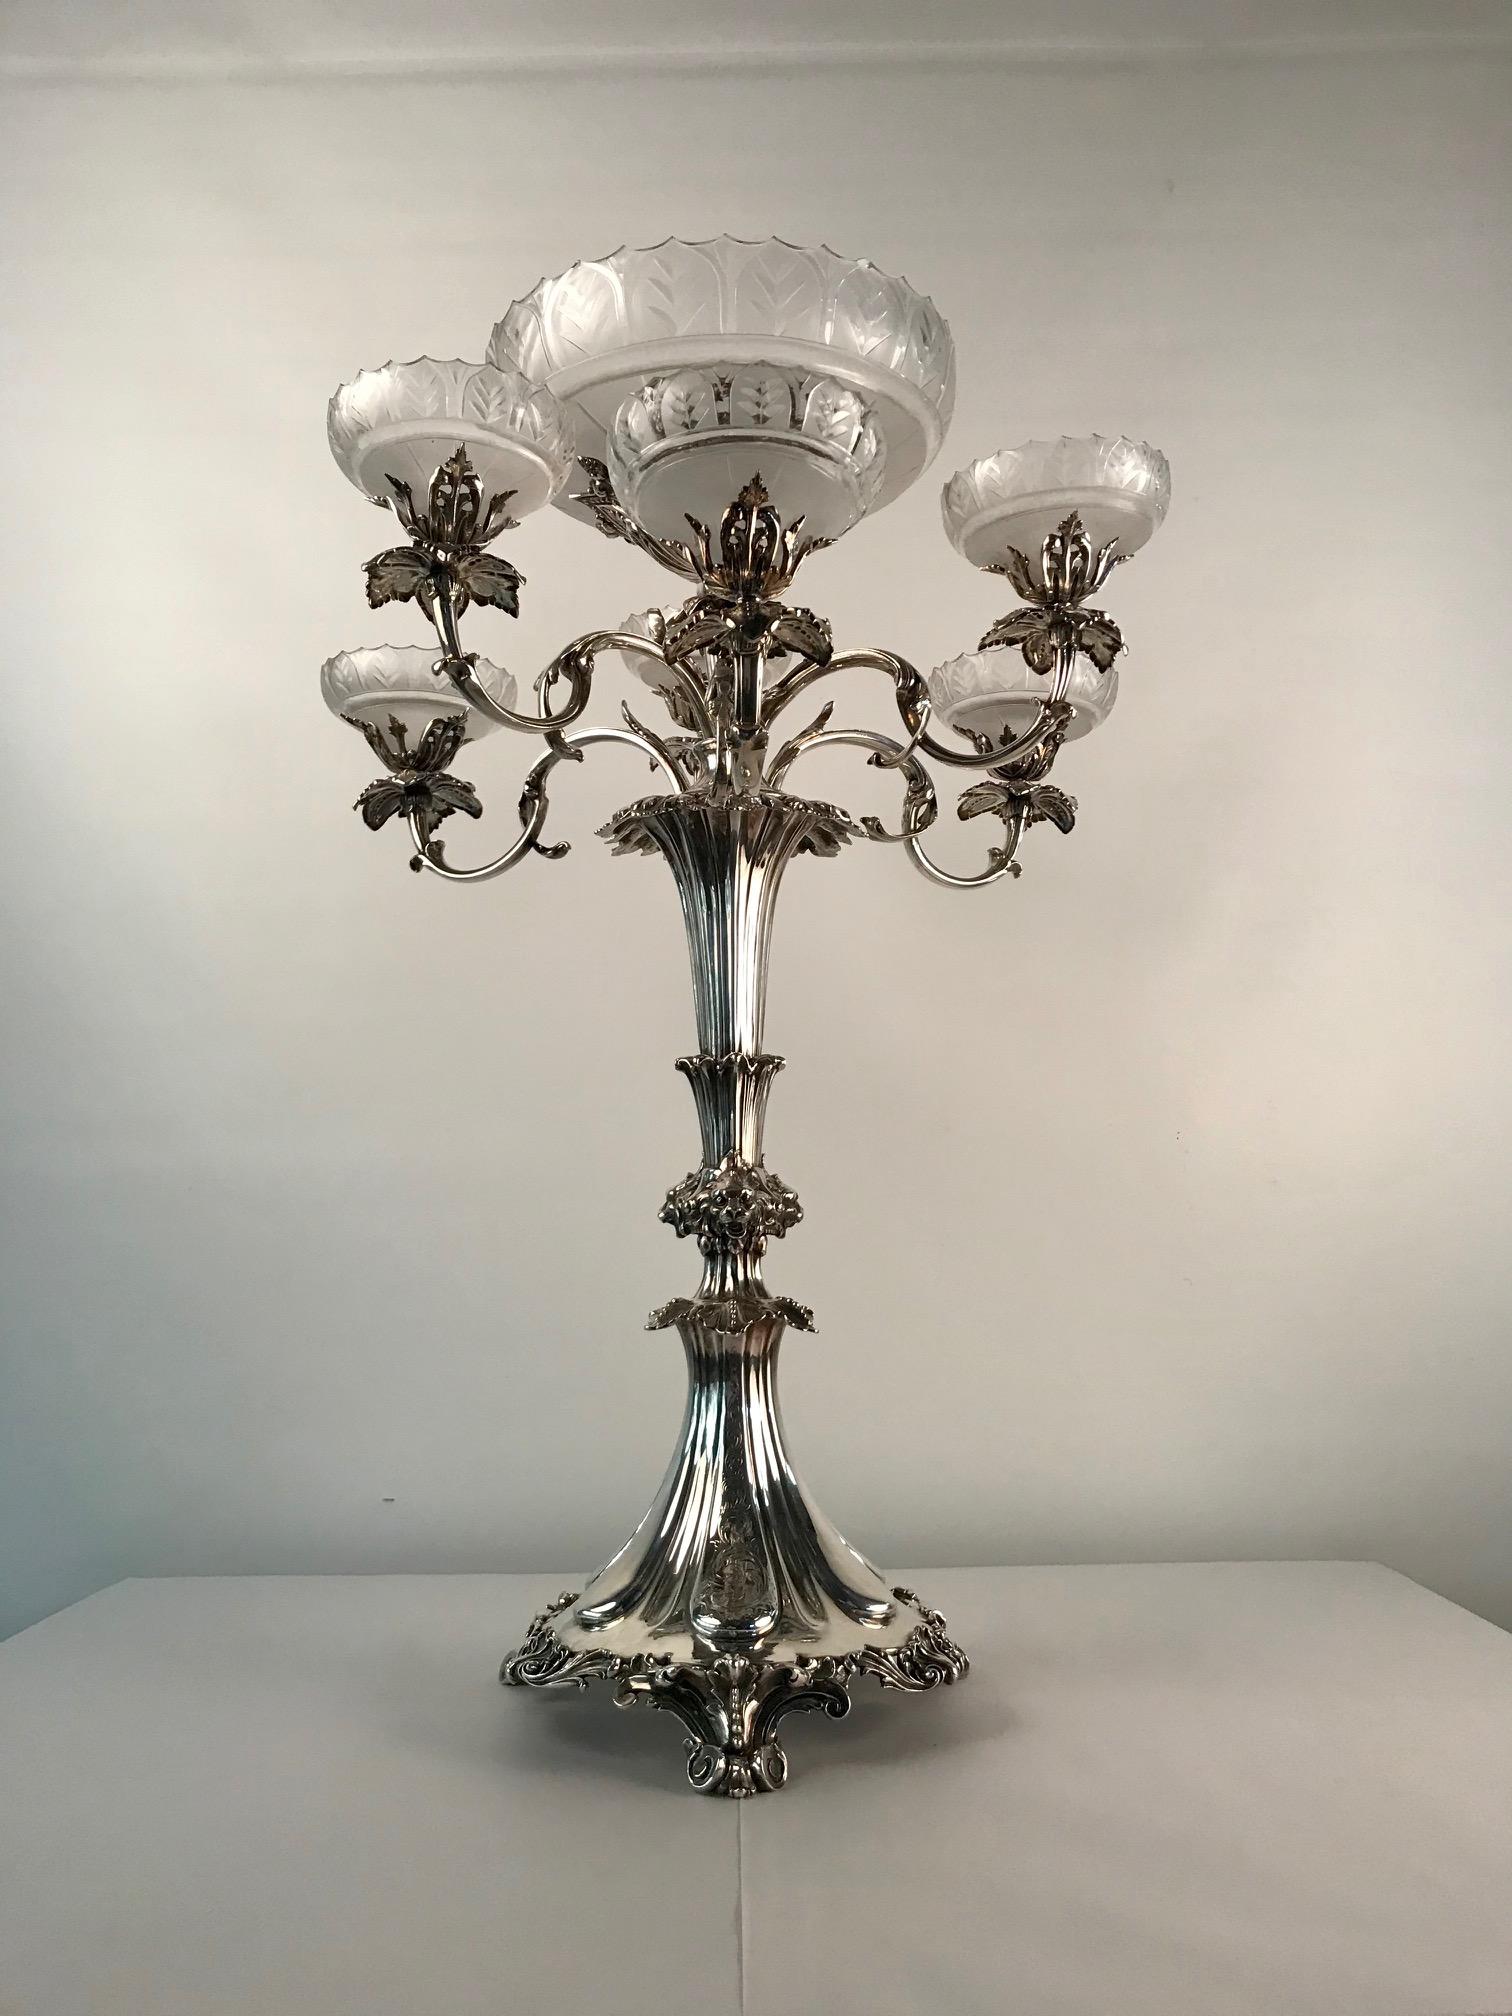 This is the largest and best centrepiece of this type that we have ever sold. It was made to Stand on a grand dining table. the six frosted and cut lead crystal bowls filled with fruit, nestled around the beautifully cut central bowl. The scrolling